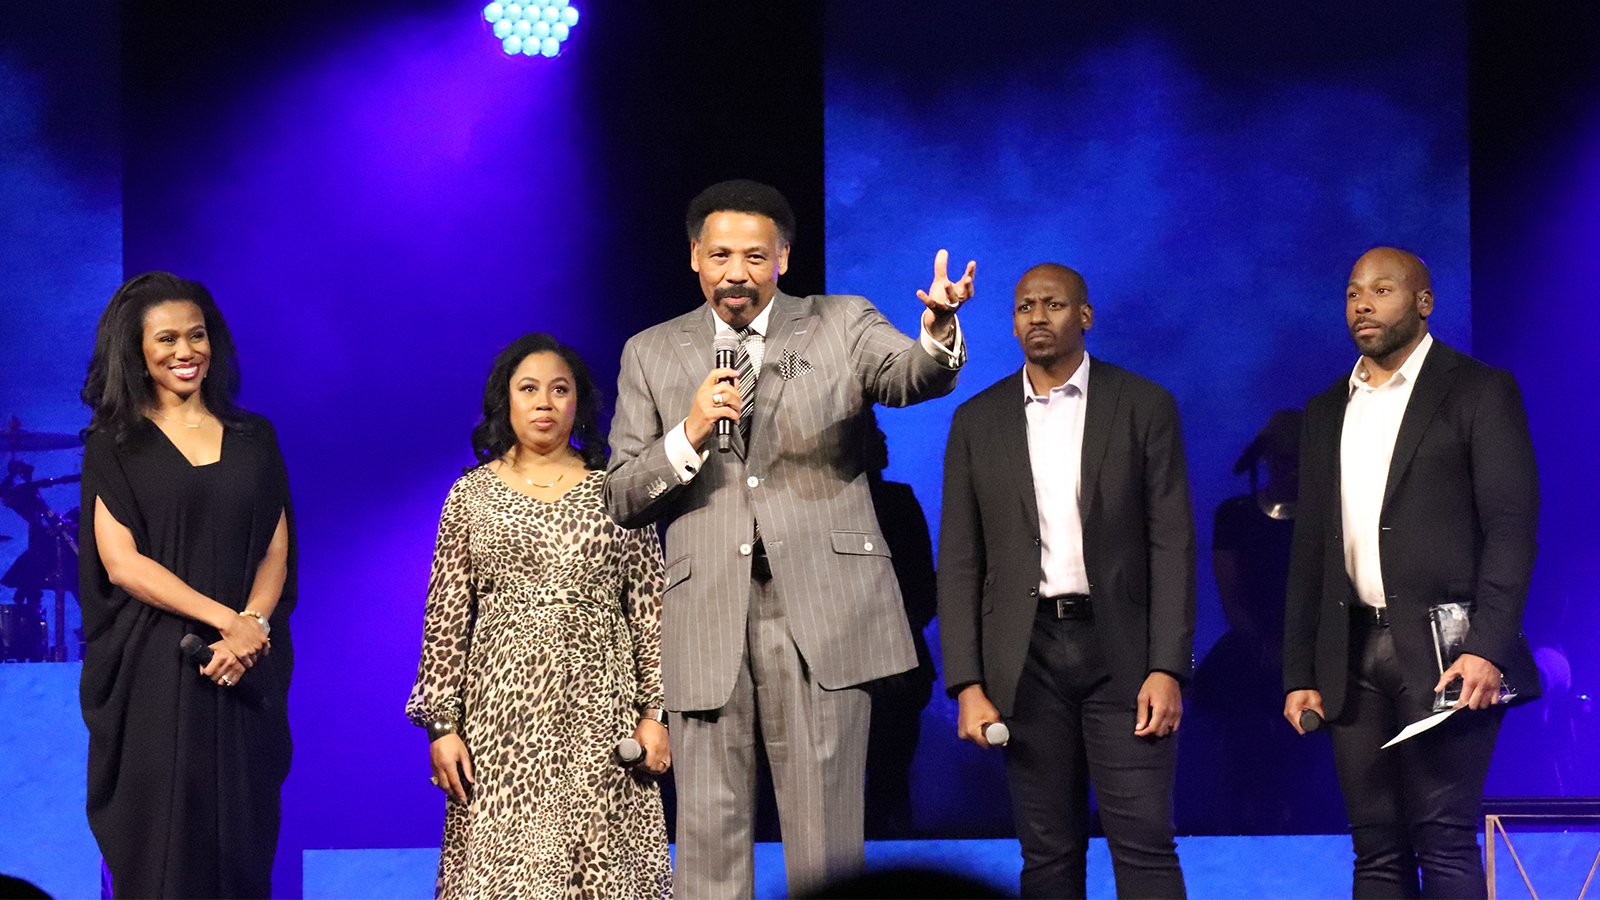 Pastor Tony Evans Center Speaks During The 22Kingdom Legacy Live22 Event On Friday Nov. 8 2019 In Dallas. Evans’ Children Stand Behind Him. Image RNS By Adelle M. Banks 